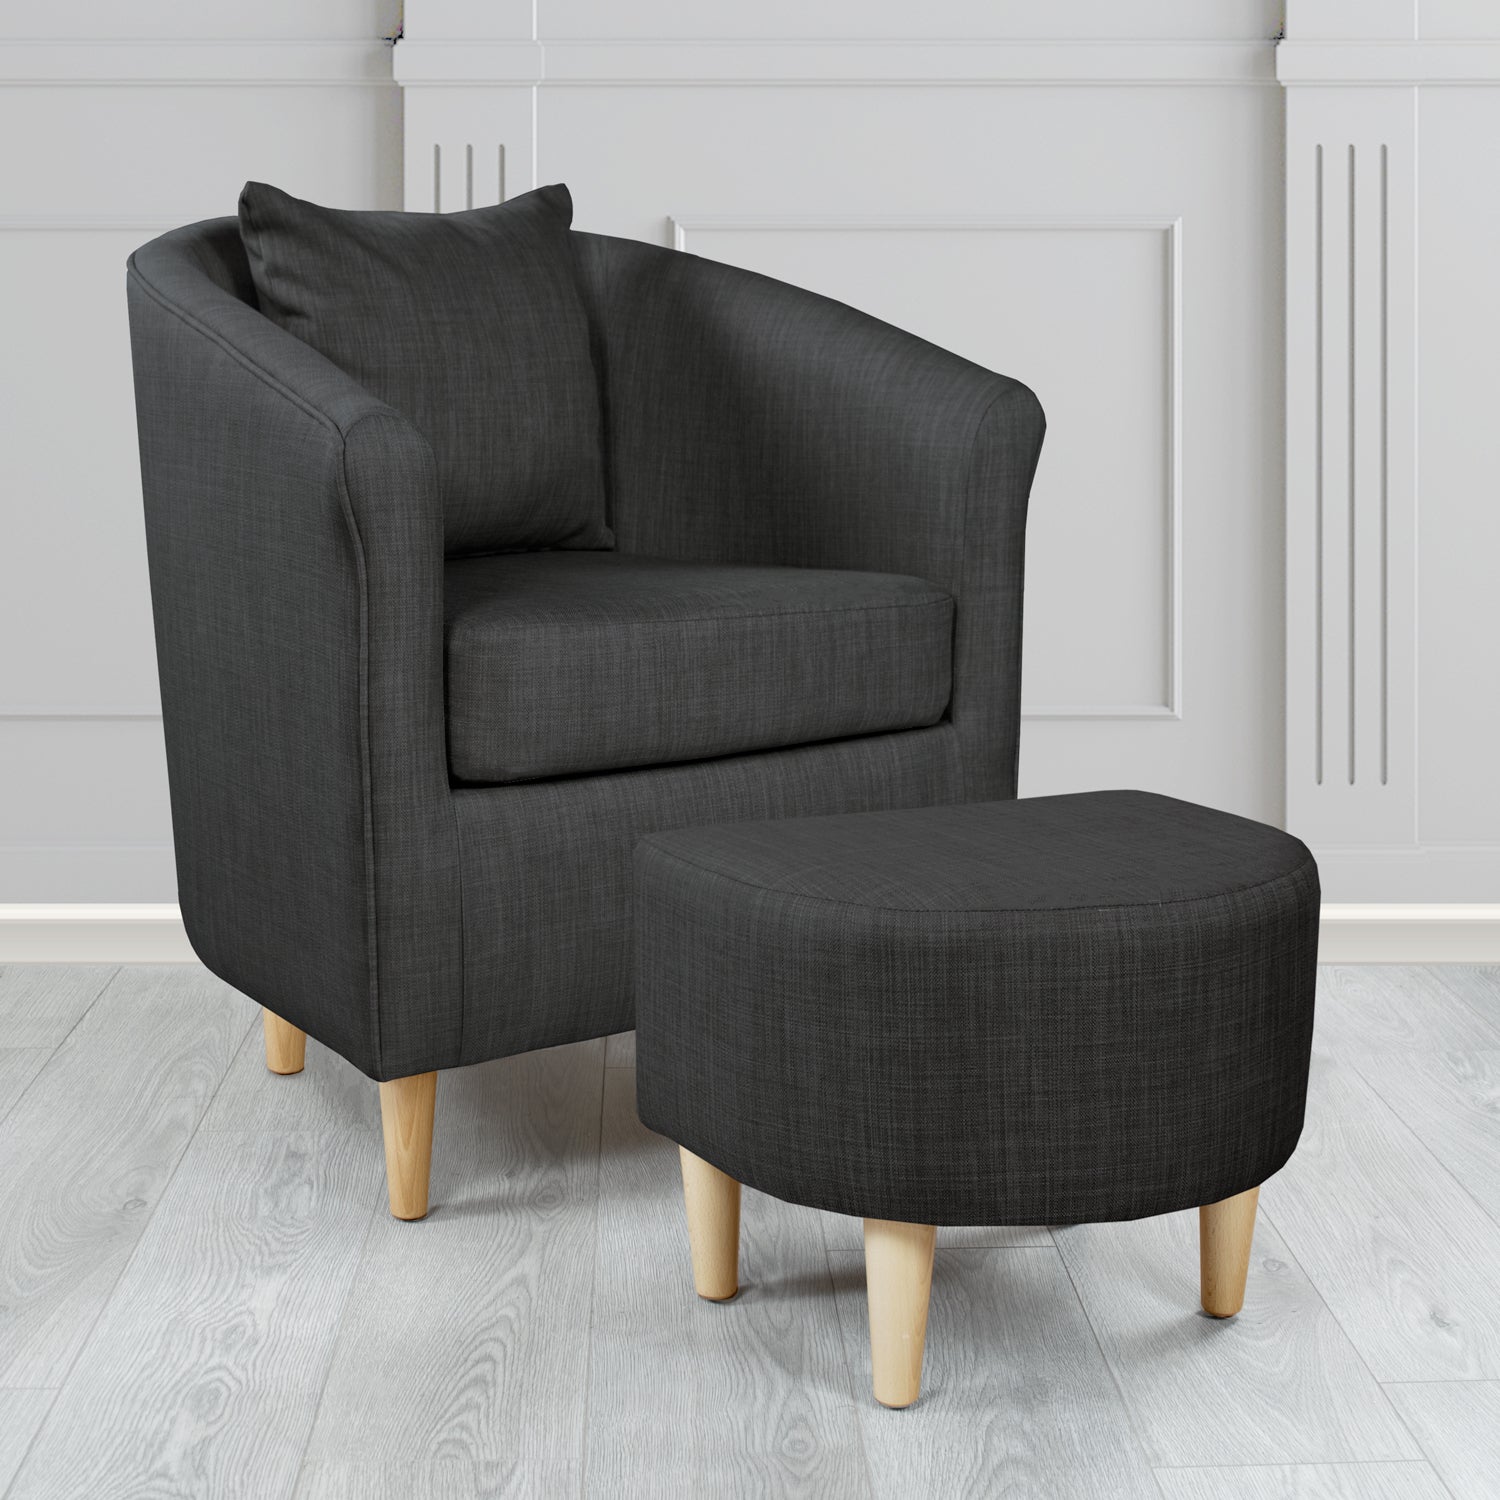 St Tropez Charles Ebony Plain Linen Fabric Tub Chair & Footstool Set with Scatter Cushion - The Tub Chair Shop